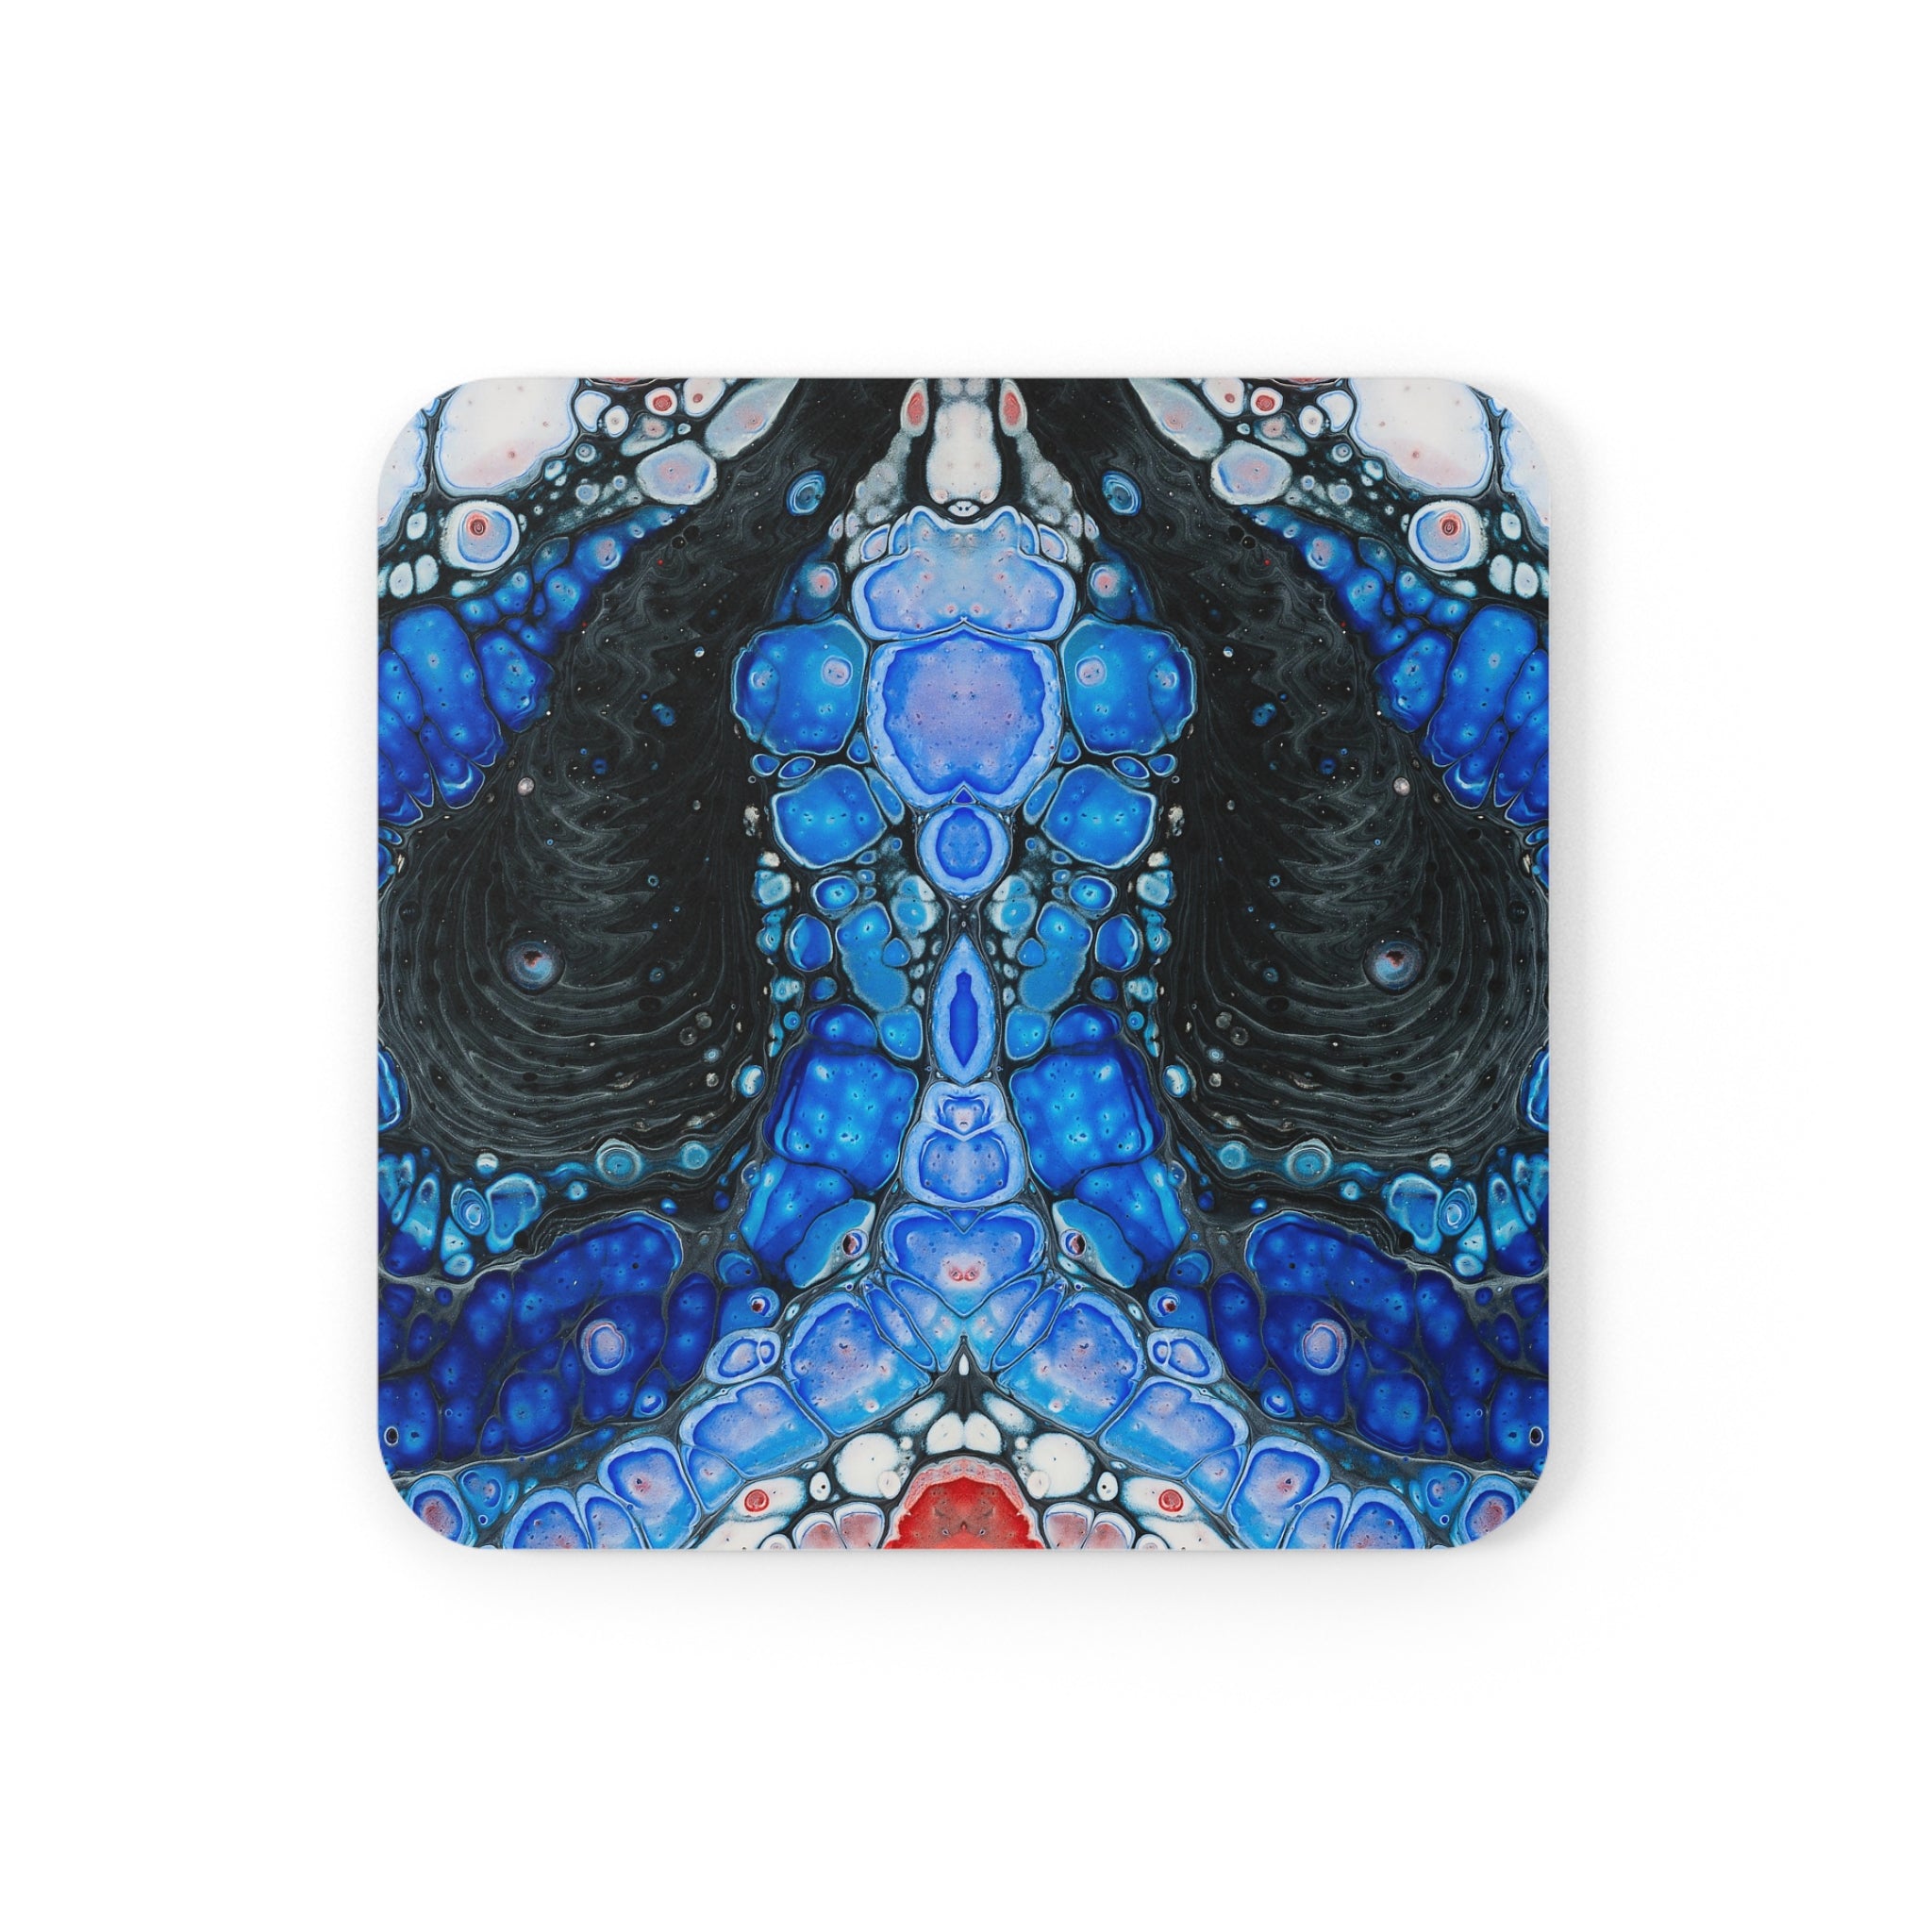 Cameron Creations - Black Hole Funnel - Stylish Coffee Coaster - Square Front